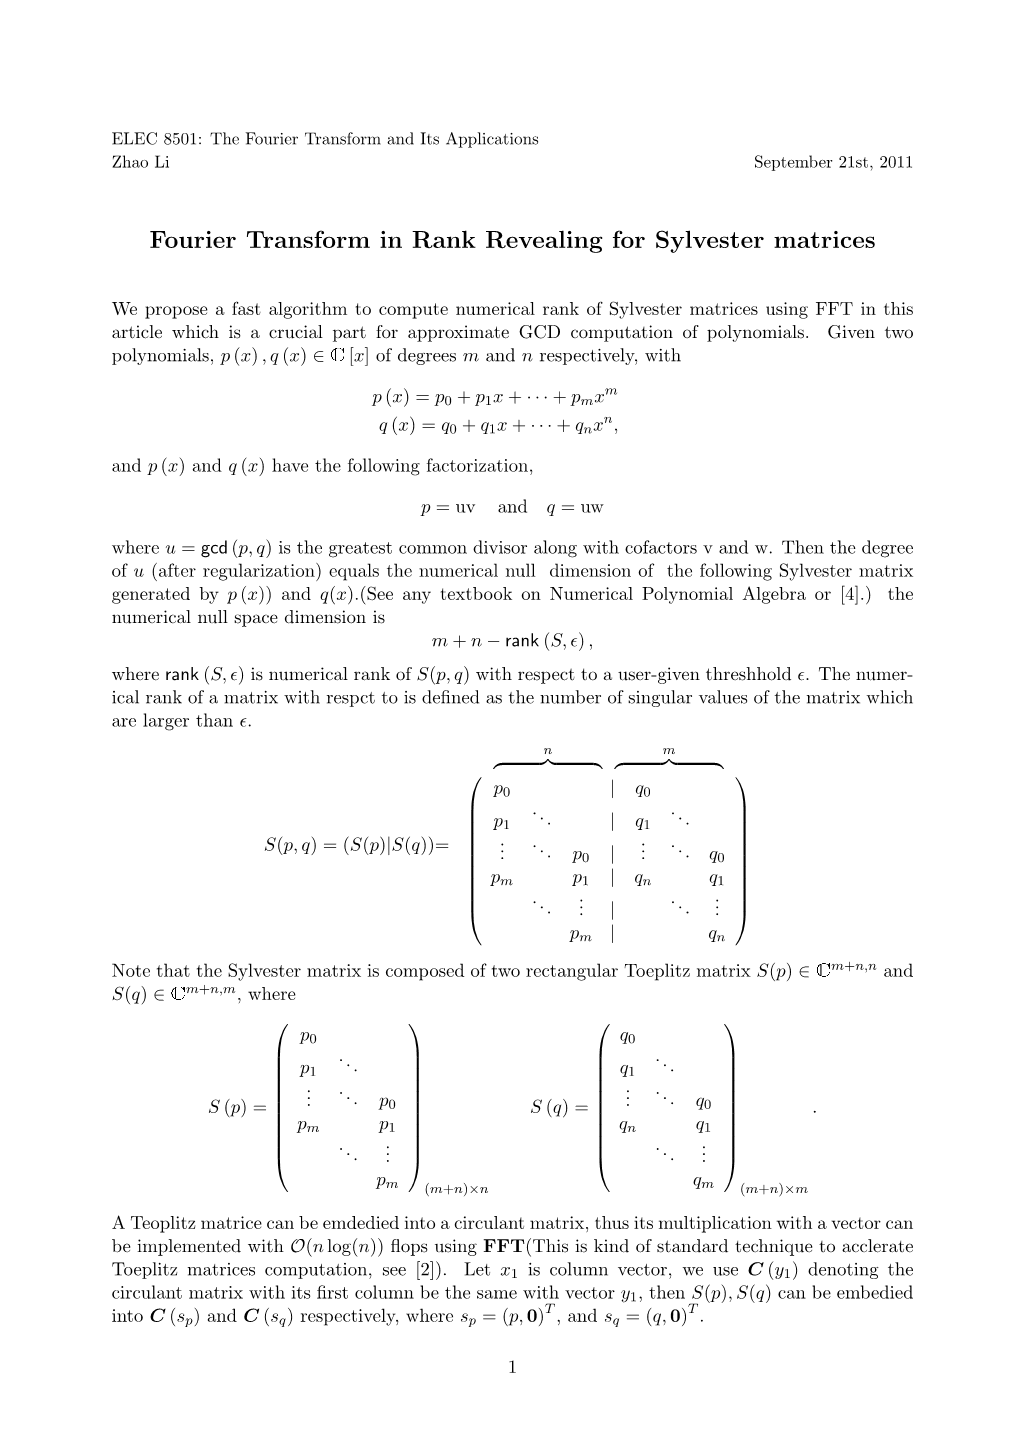 Fourier Transform in Rank Revealing for Sylvester Matrices